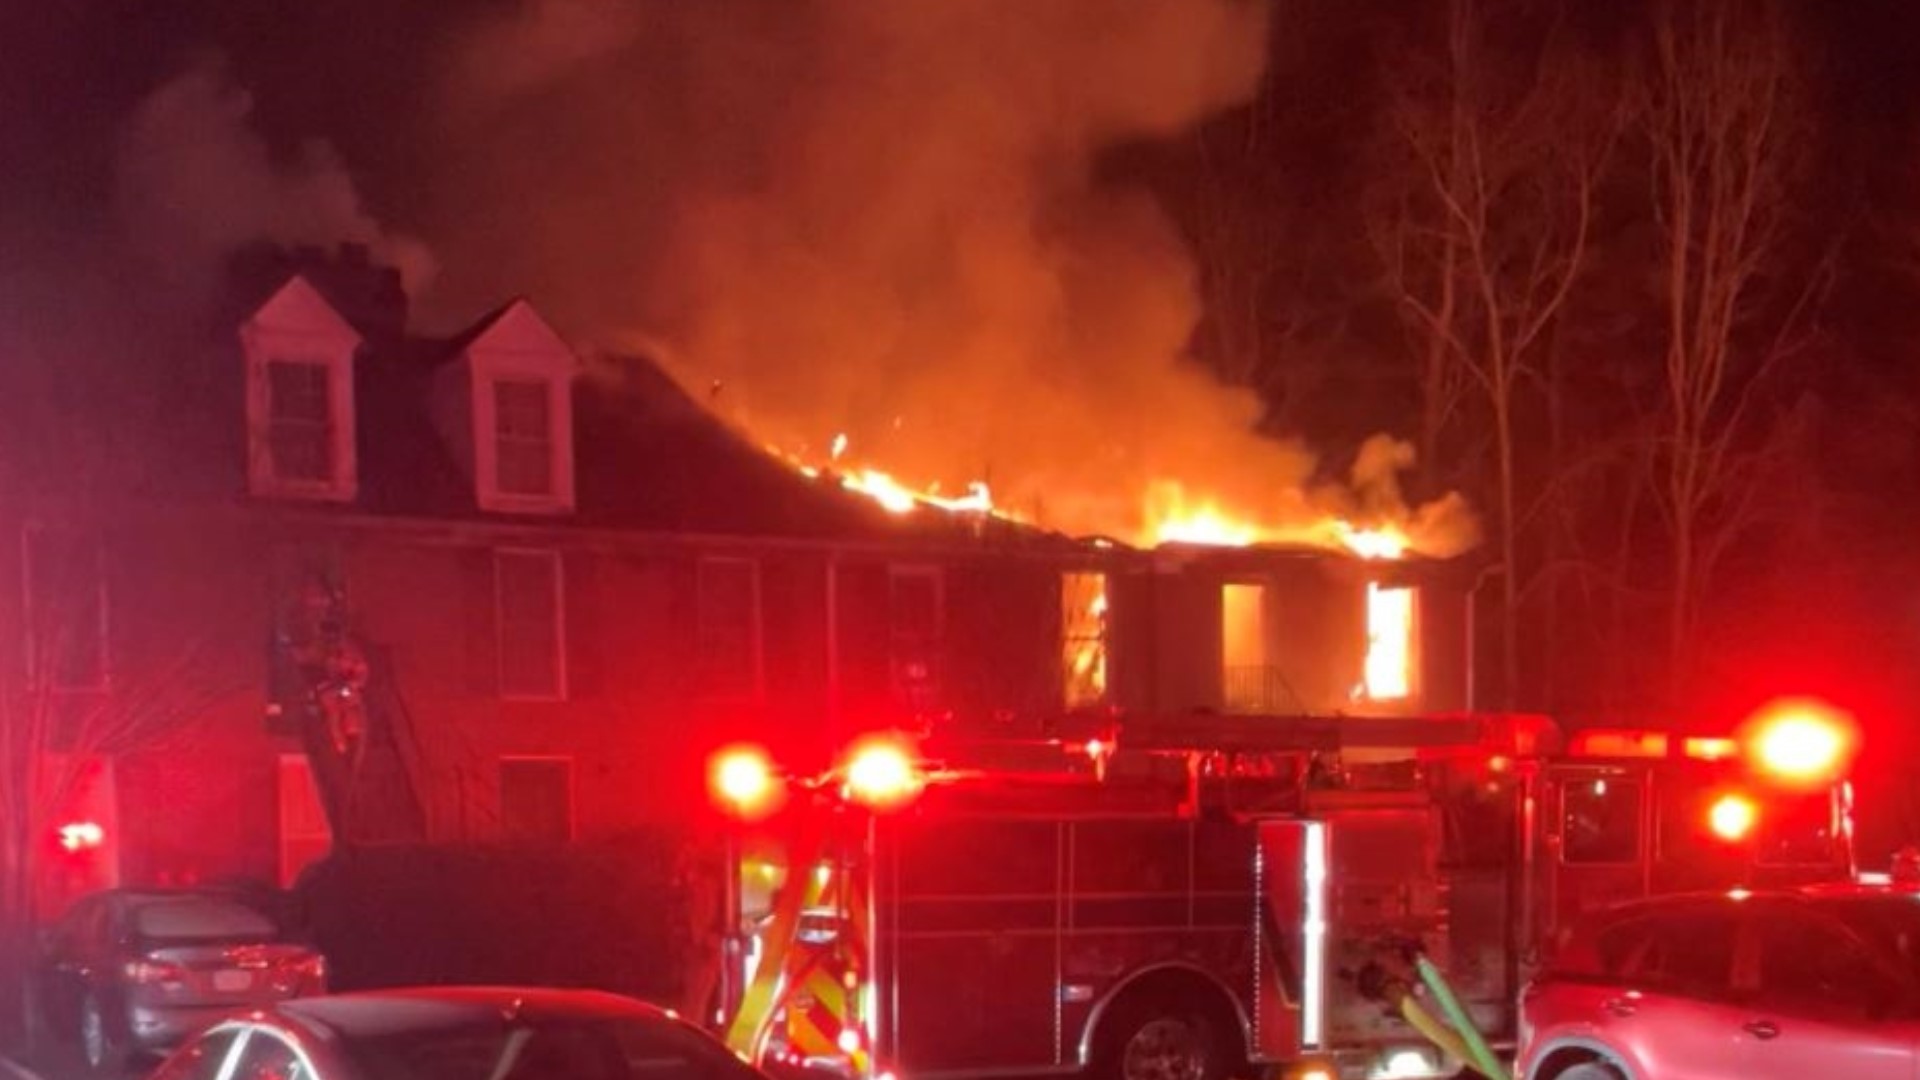 One victim suffered serious burns and several people are without a home after the fire ripped through their apartment building.